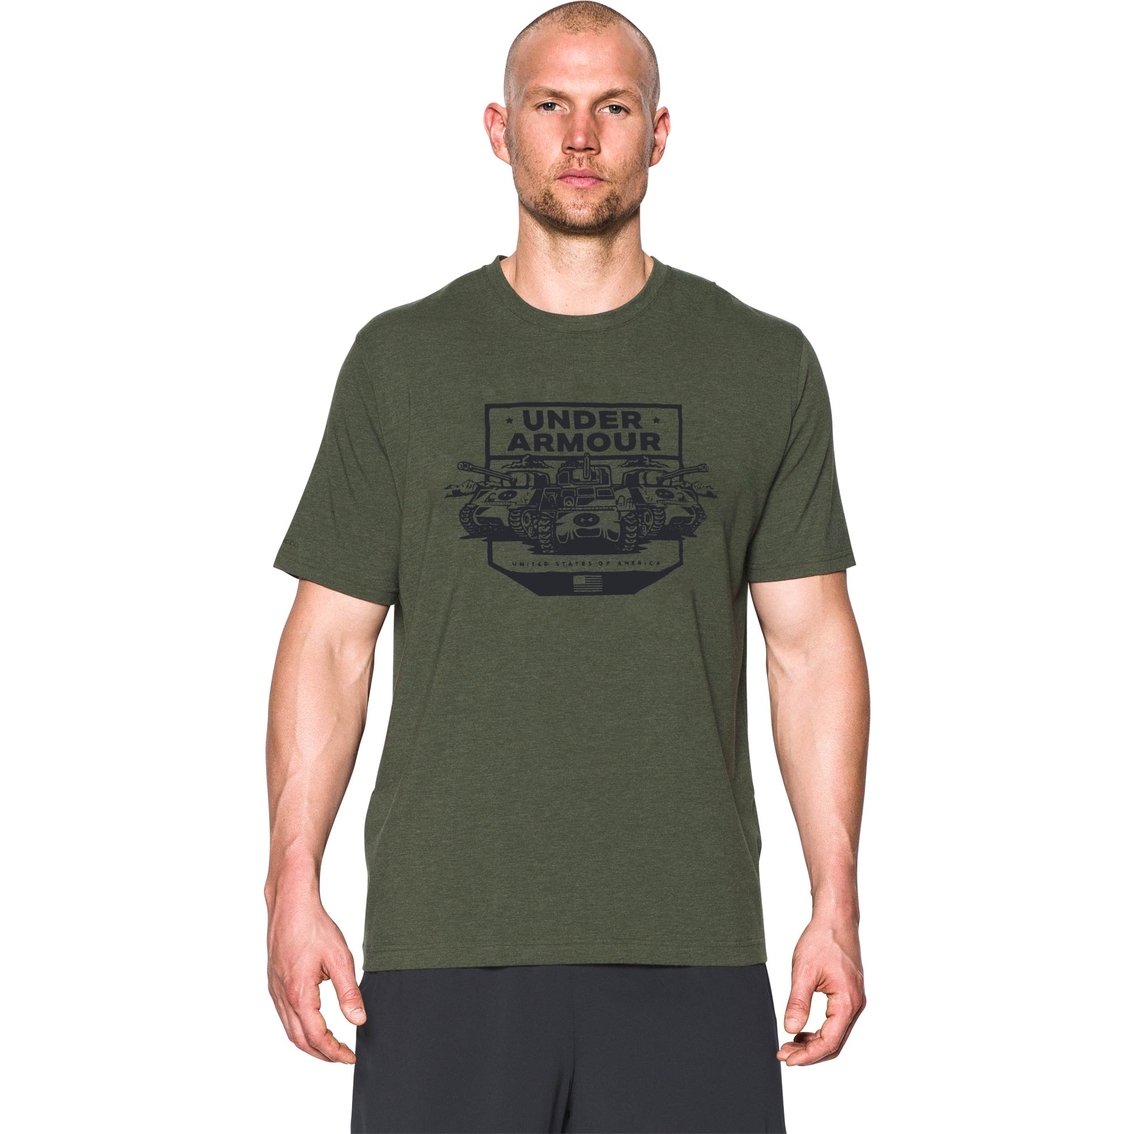 Under Armour Men's Ua Freedom By Land Tee | Shirts | Clothing ...